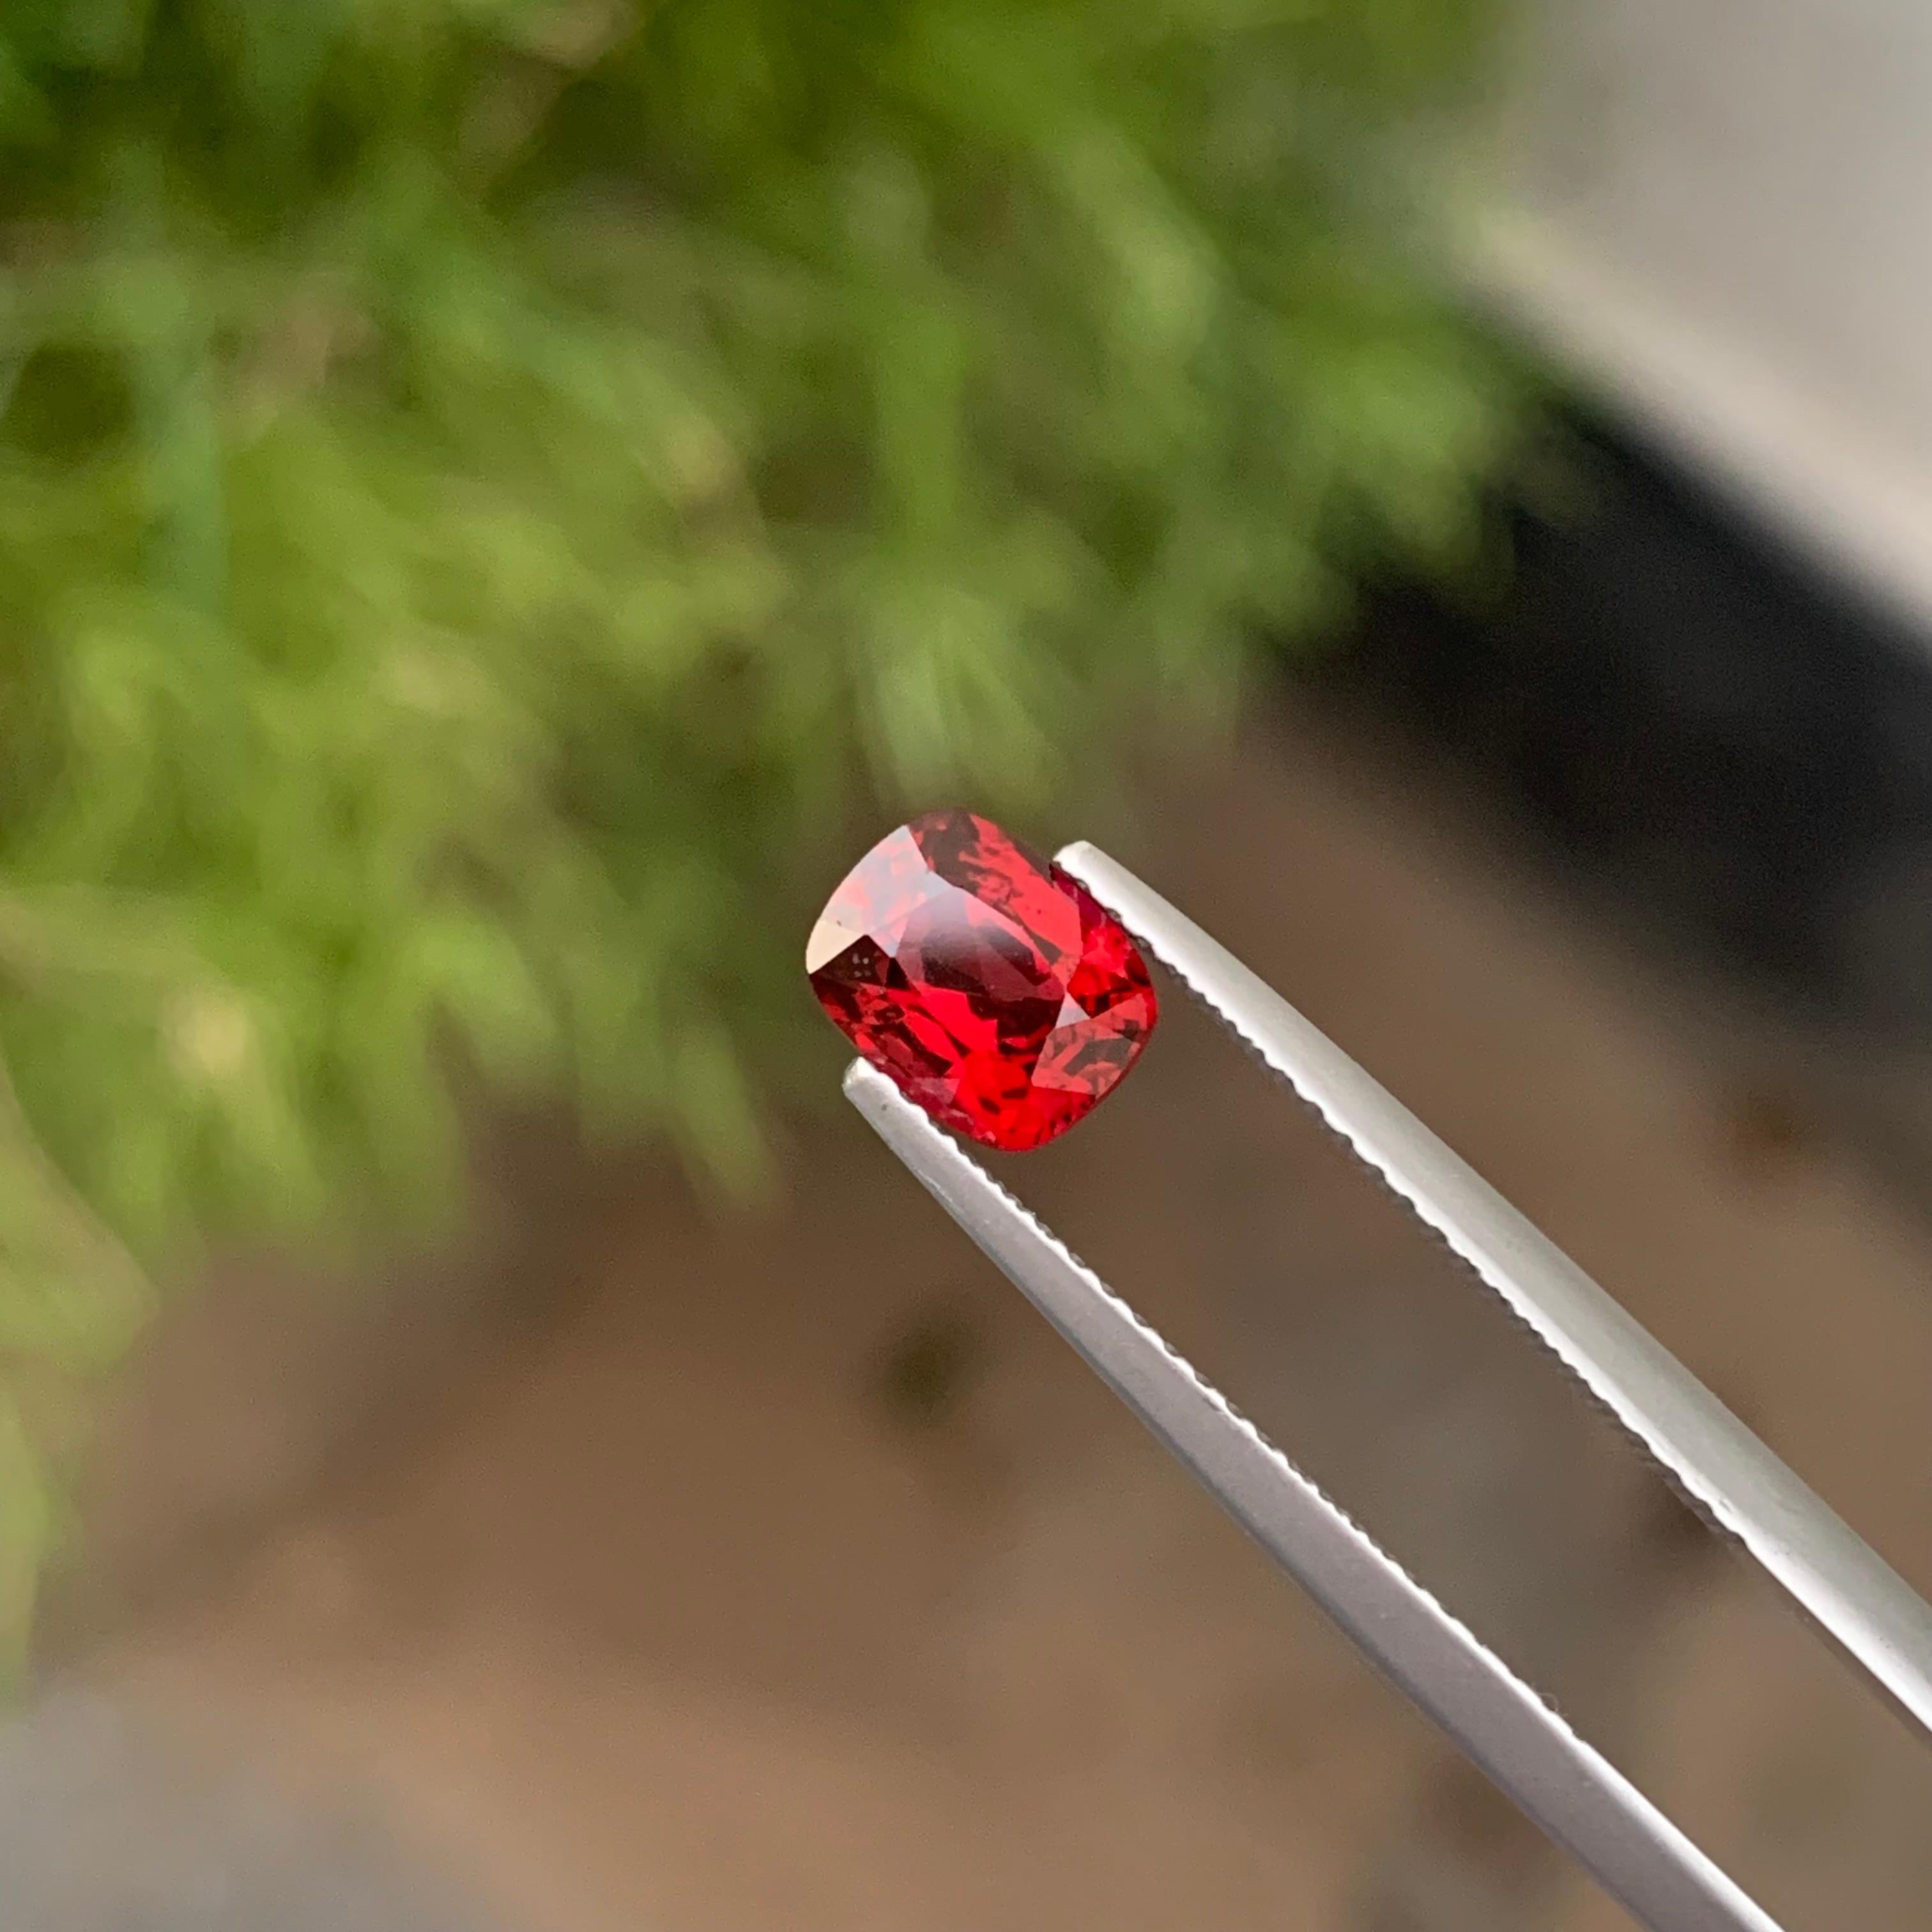 Exceptional 1.15 Carat Natural Loose Red Spinel From Burma Myanmar For Sale 1